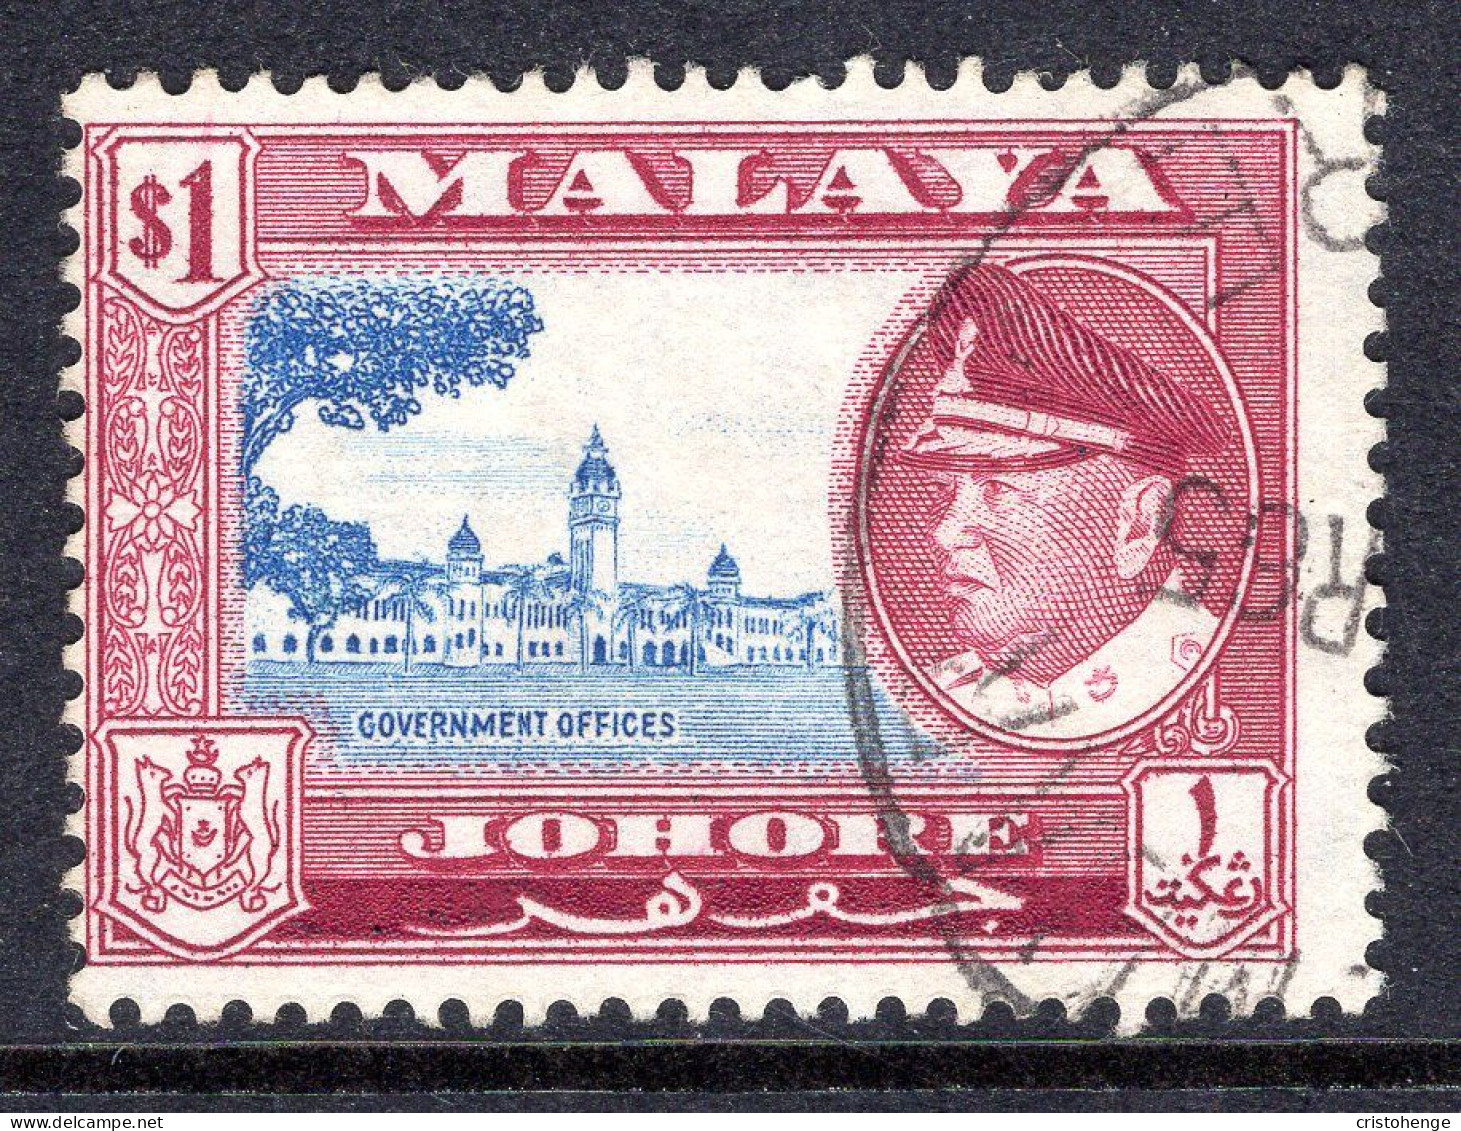 Malaysian States - Johore - 1960 Pictorials - $1 Government Offices Used (SG 163) - Johore